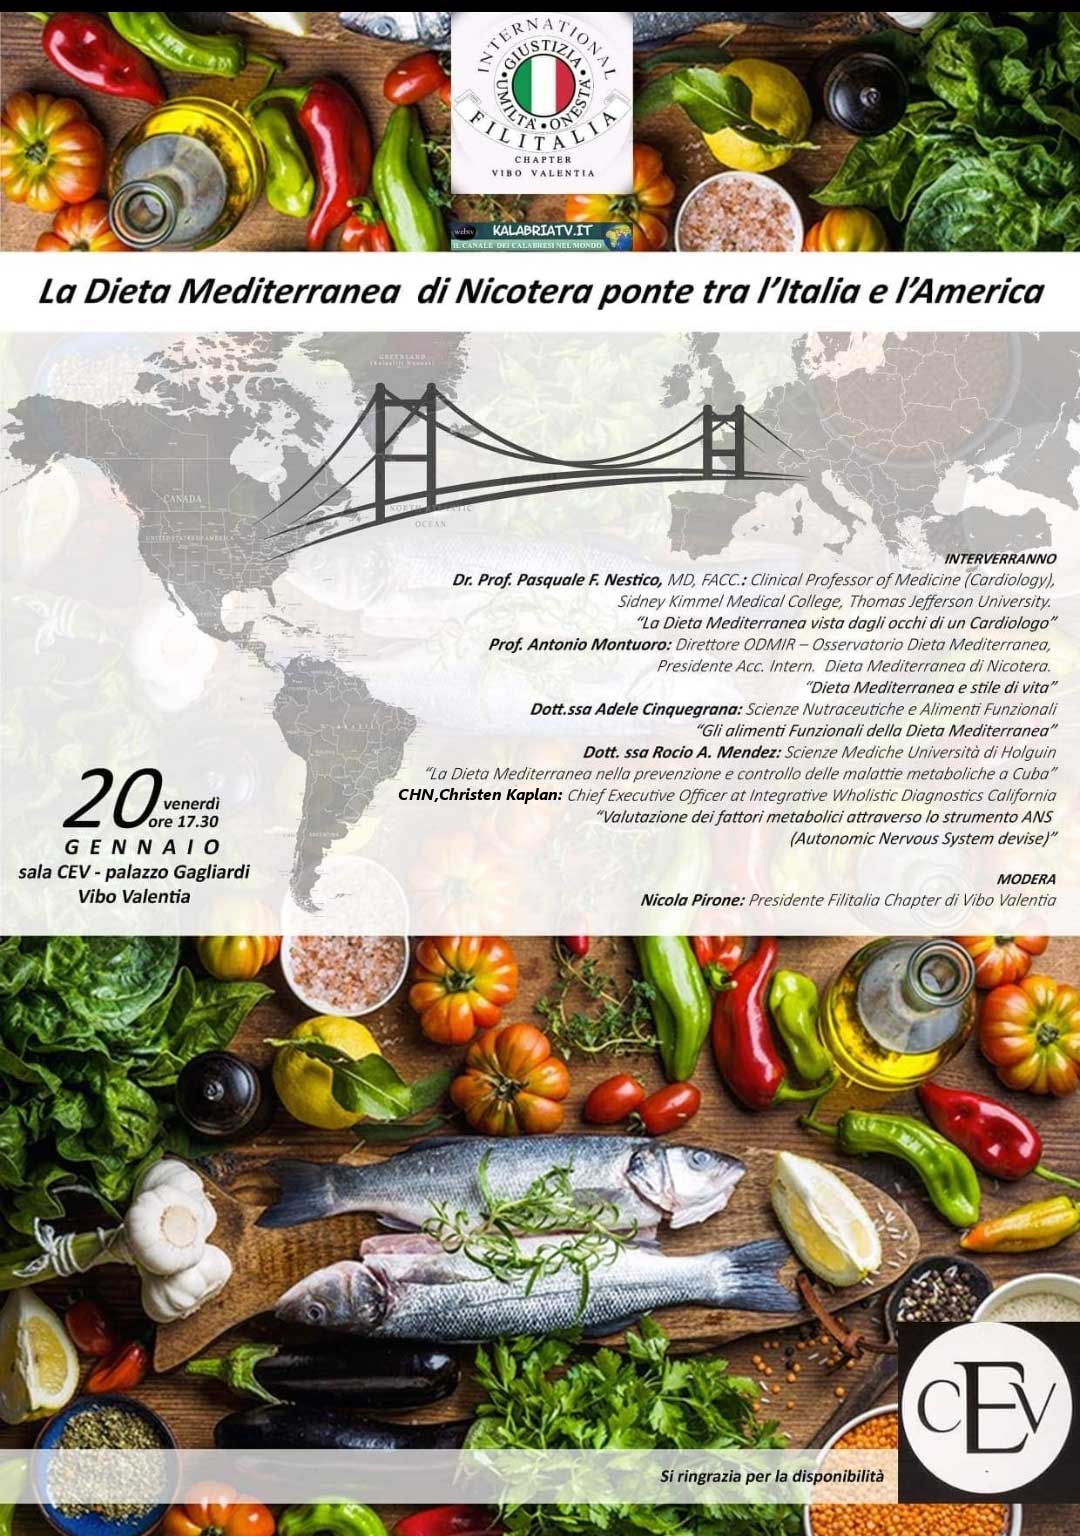 Itialian conference on the mediterranean diet